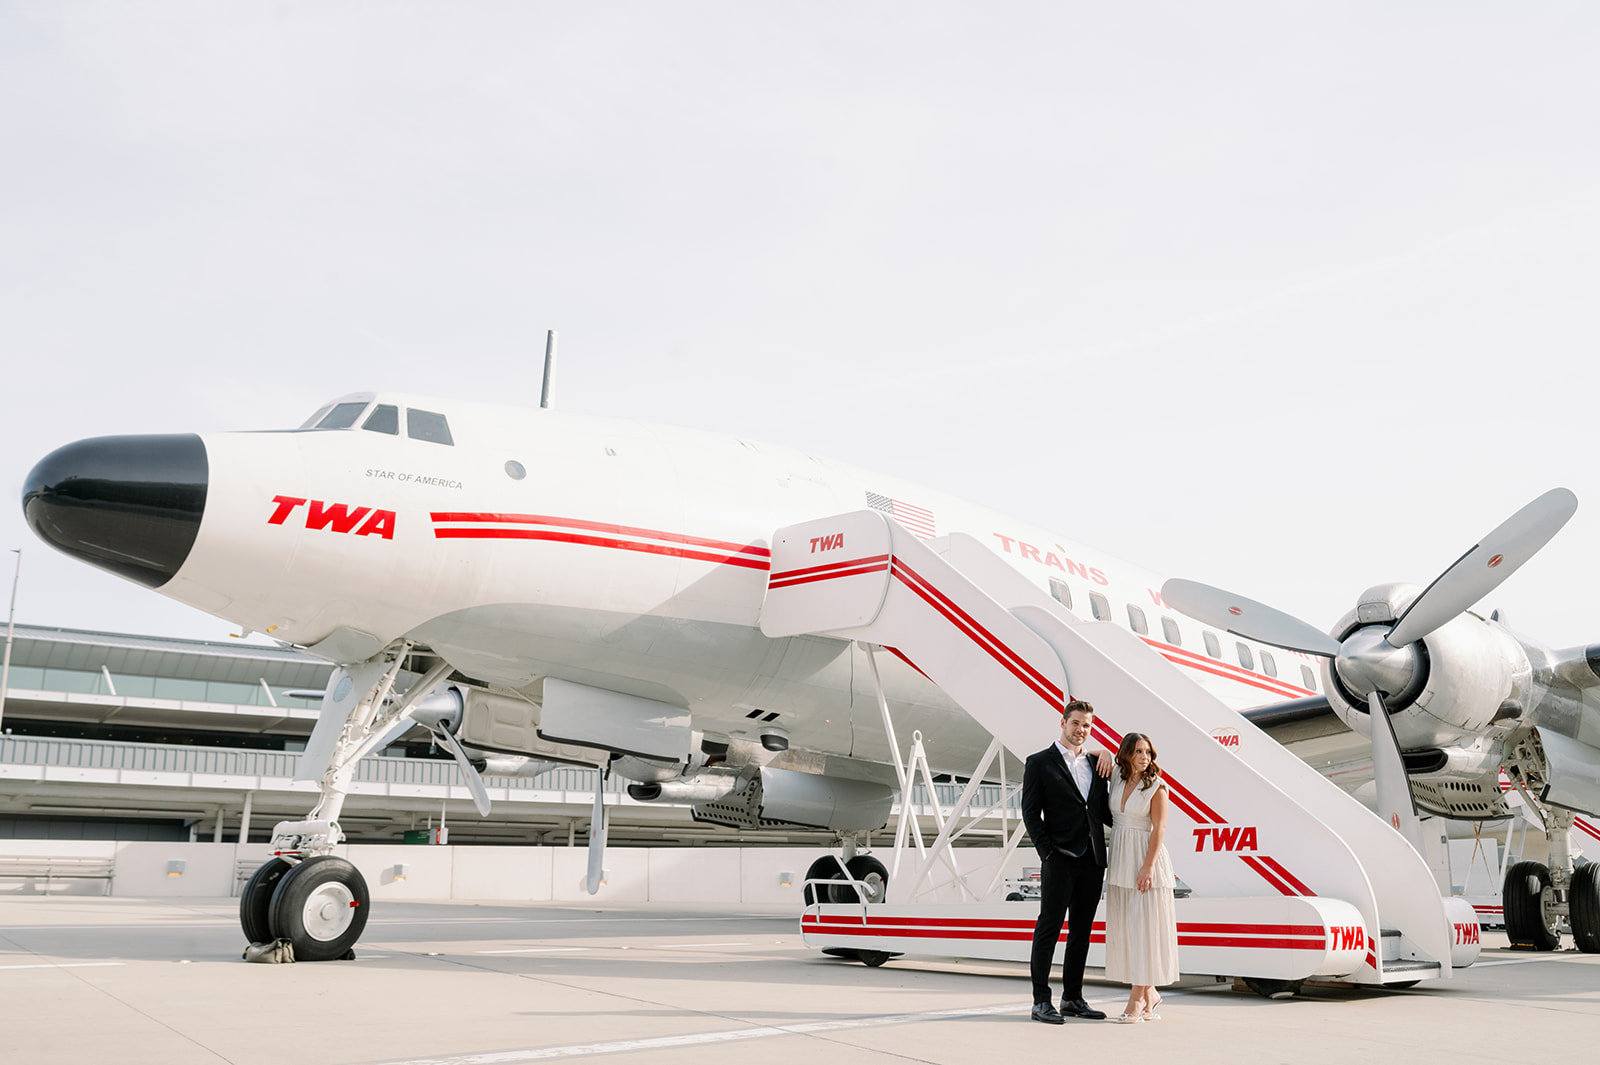 TWA Hotel engagement photos next to the vintage Connie Aircraft.